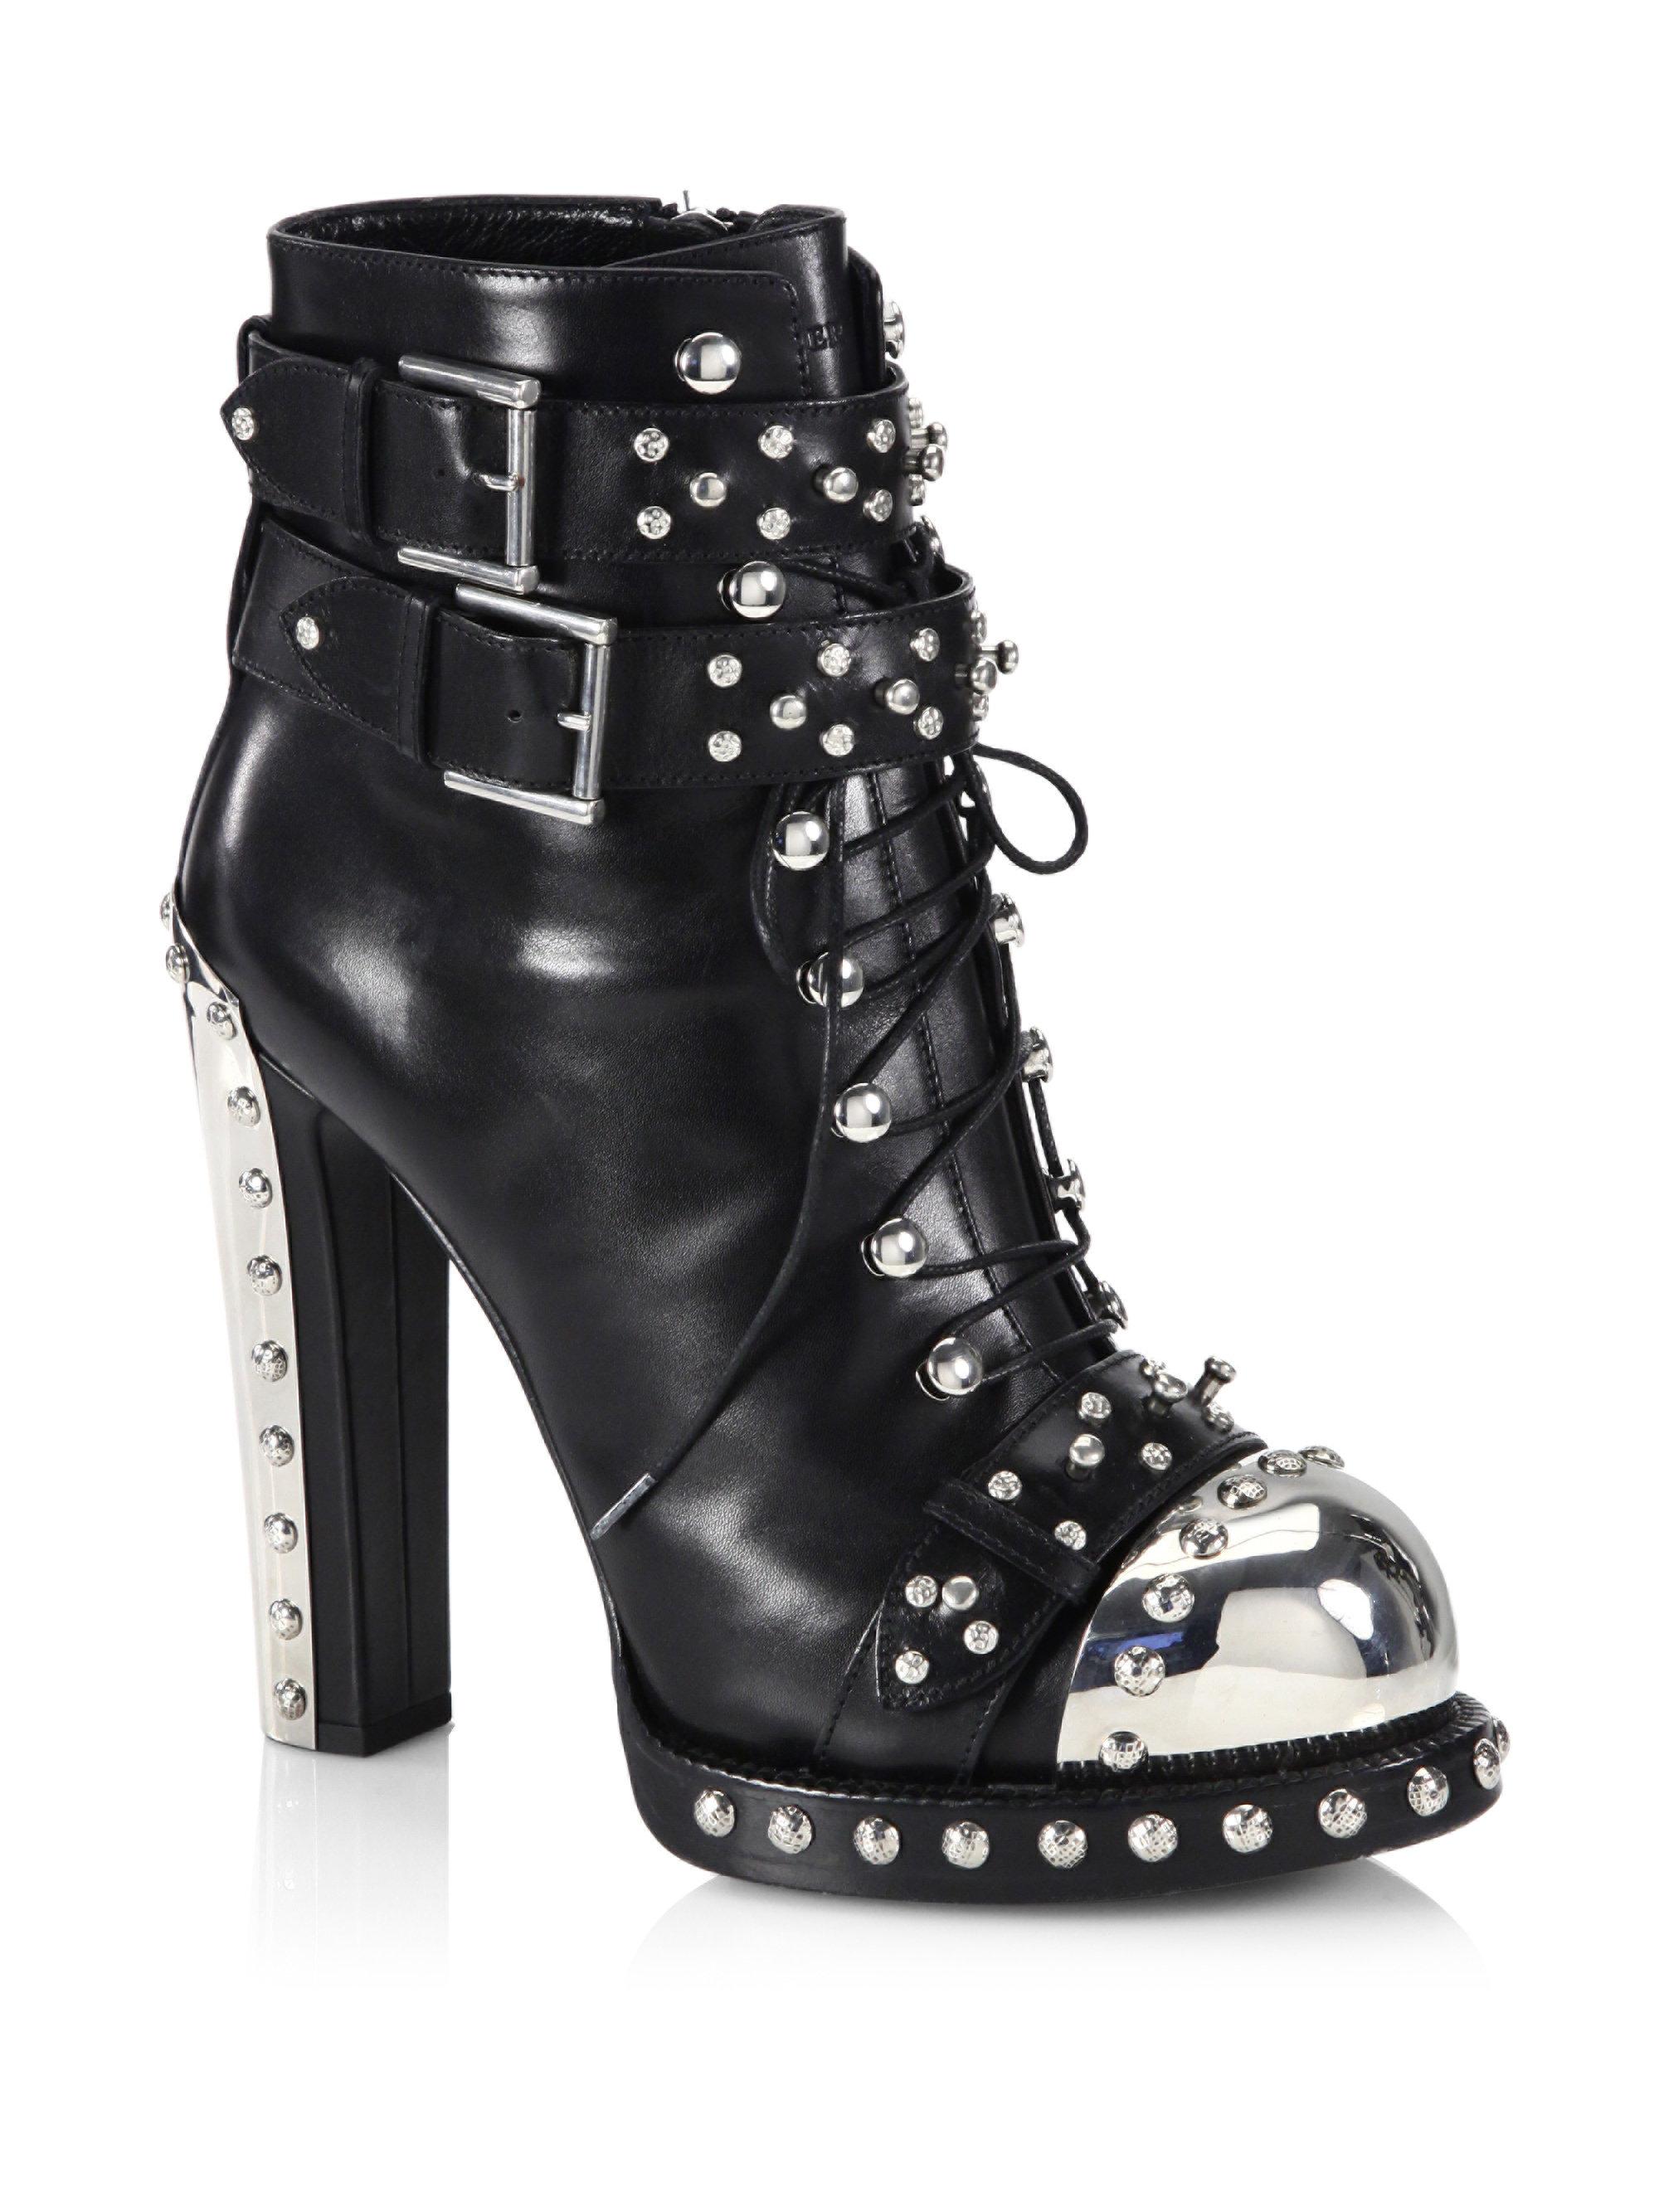 Alexander McQueen Studded Leather Lace-up Buckle Booties in Black - Lyst